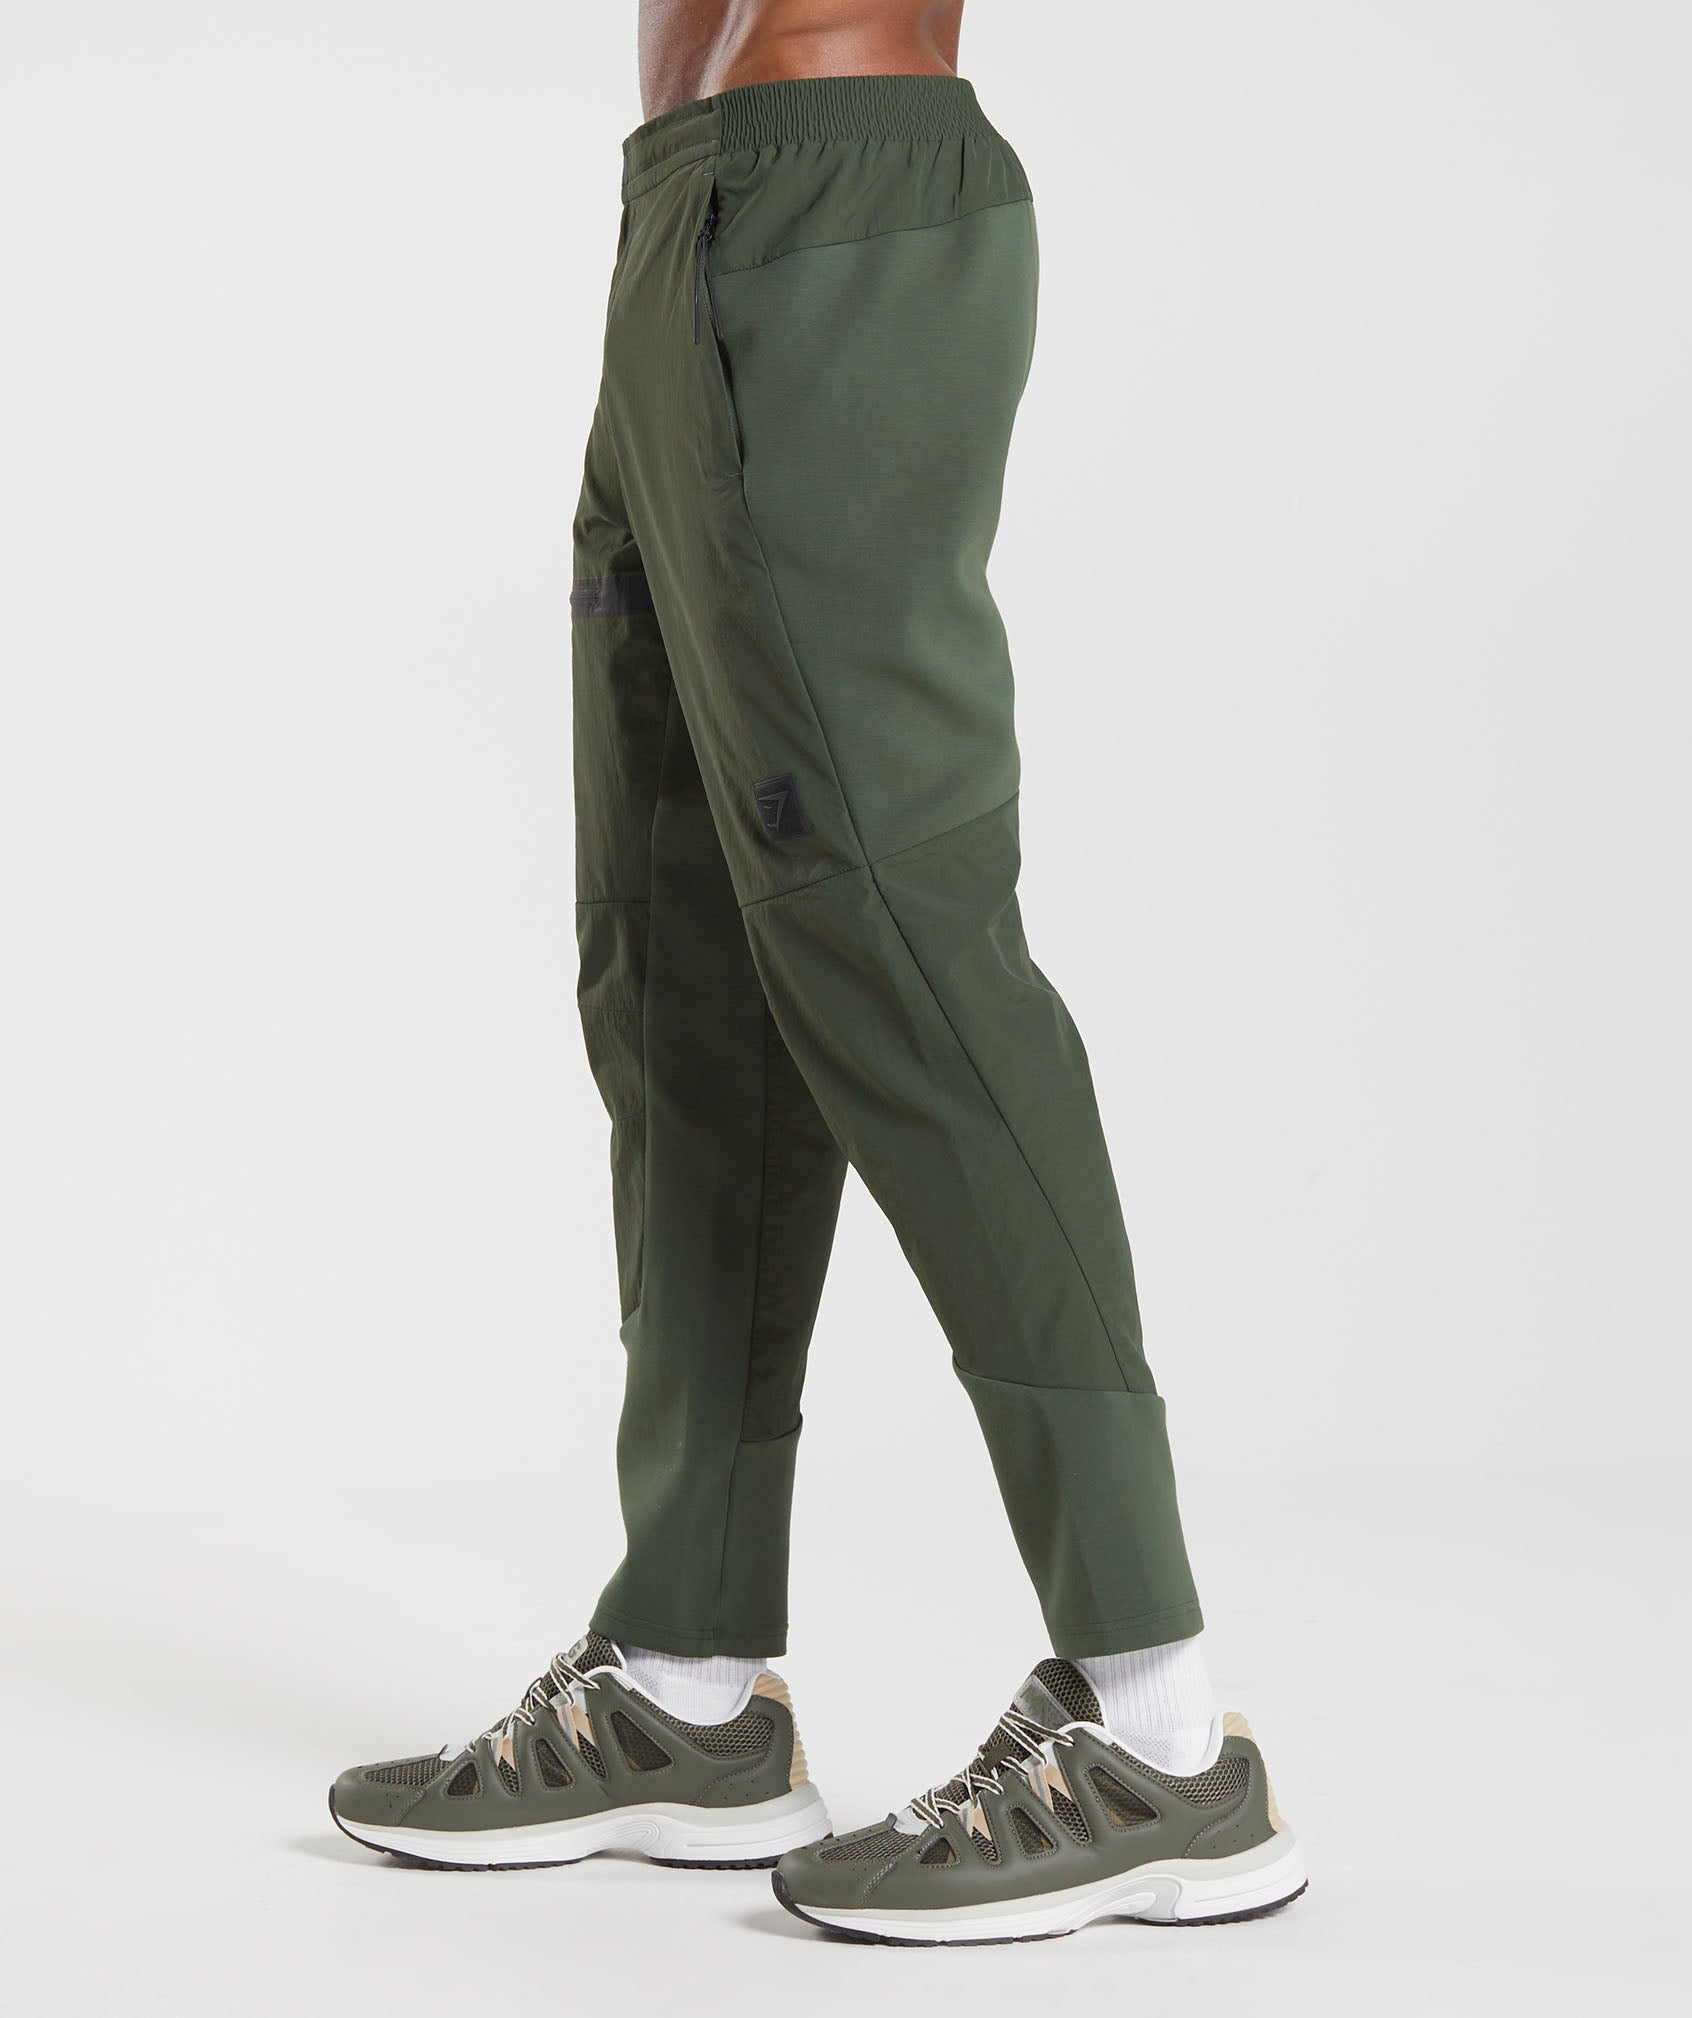 Retake Woven Joggers in Moss Olive - view 3